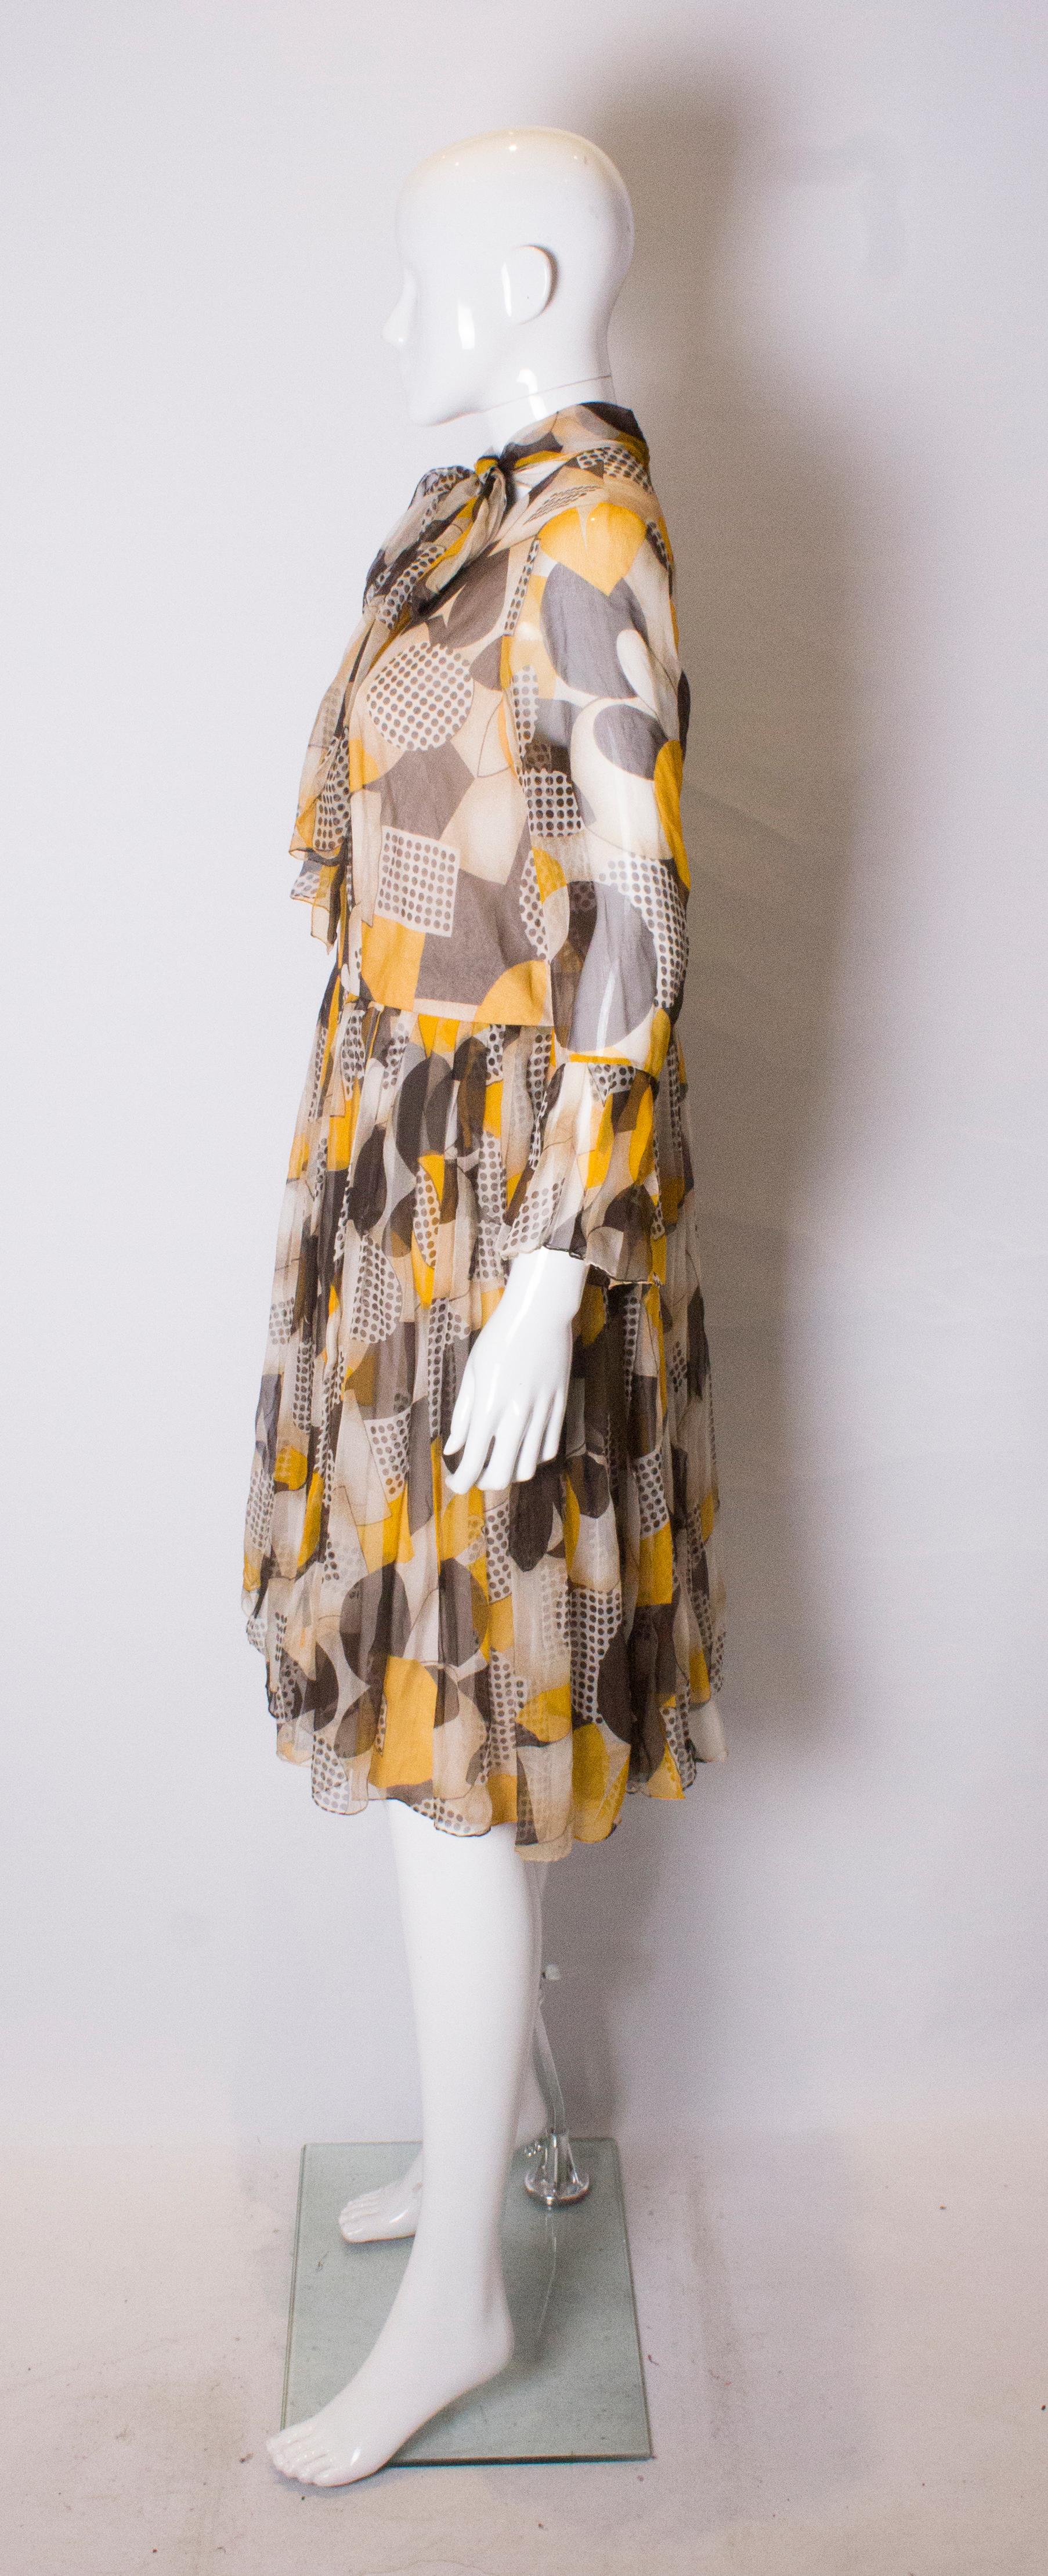 Groovy Vintage Silk Chiffon Cocktail Dress In Good Condition For Sale In London, GB